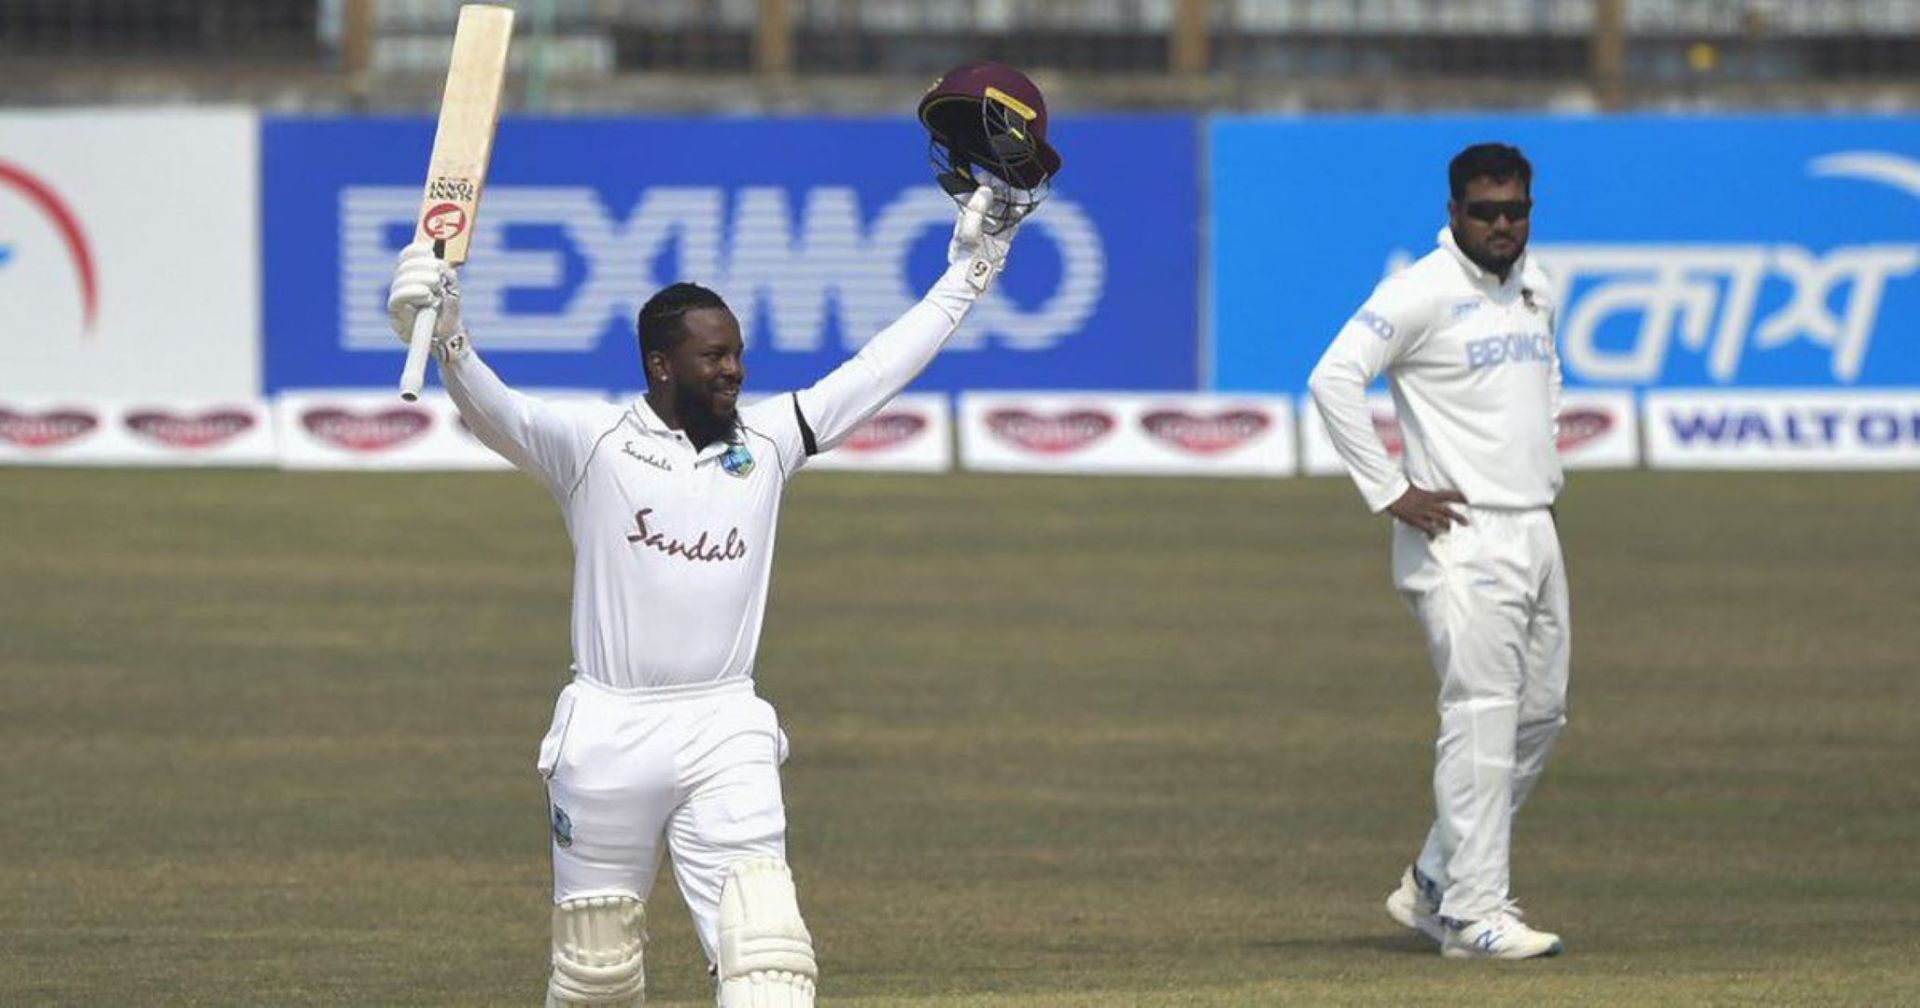 Kyle Mayers made a splendid 210* in a record chase in Bangladesh